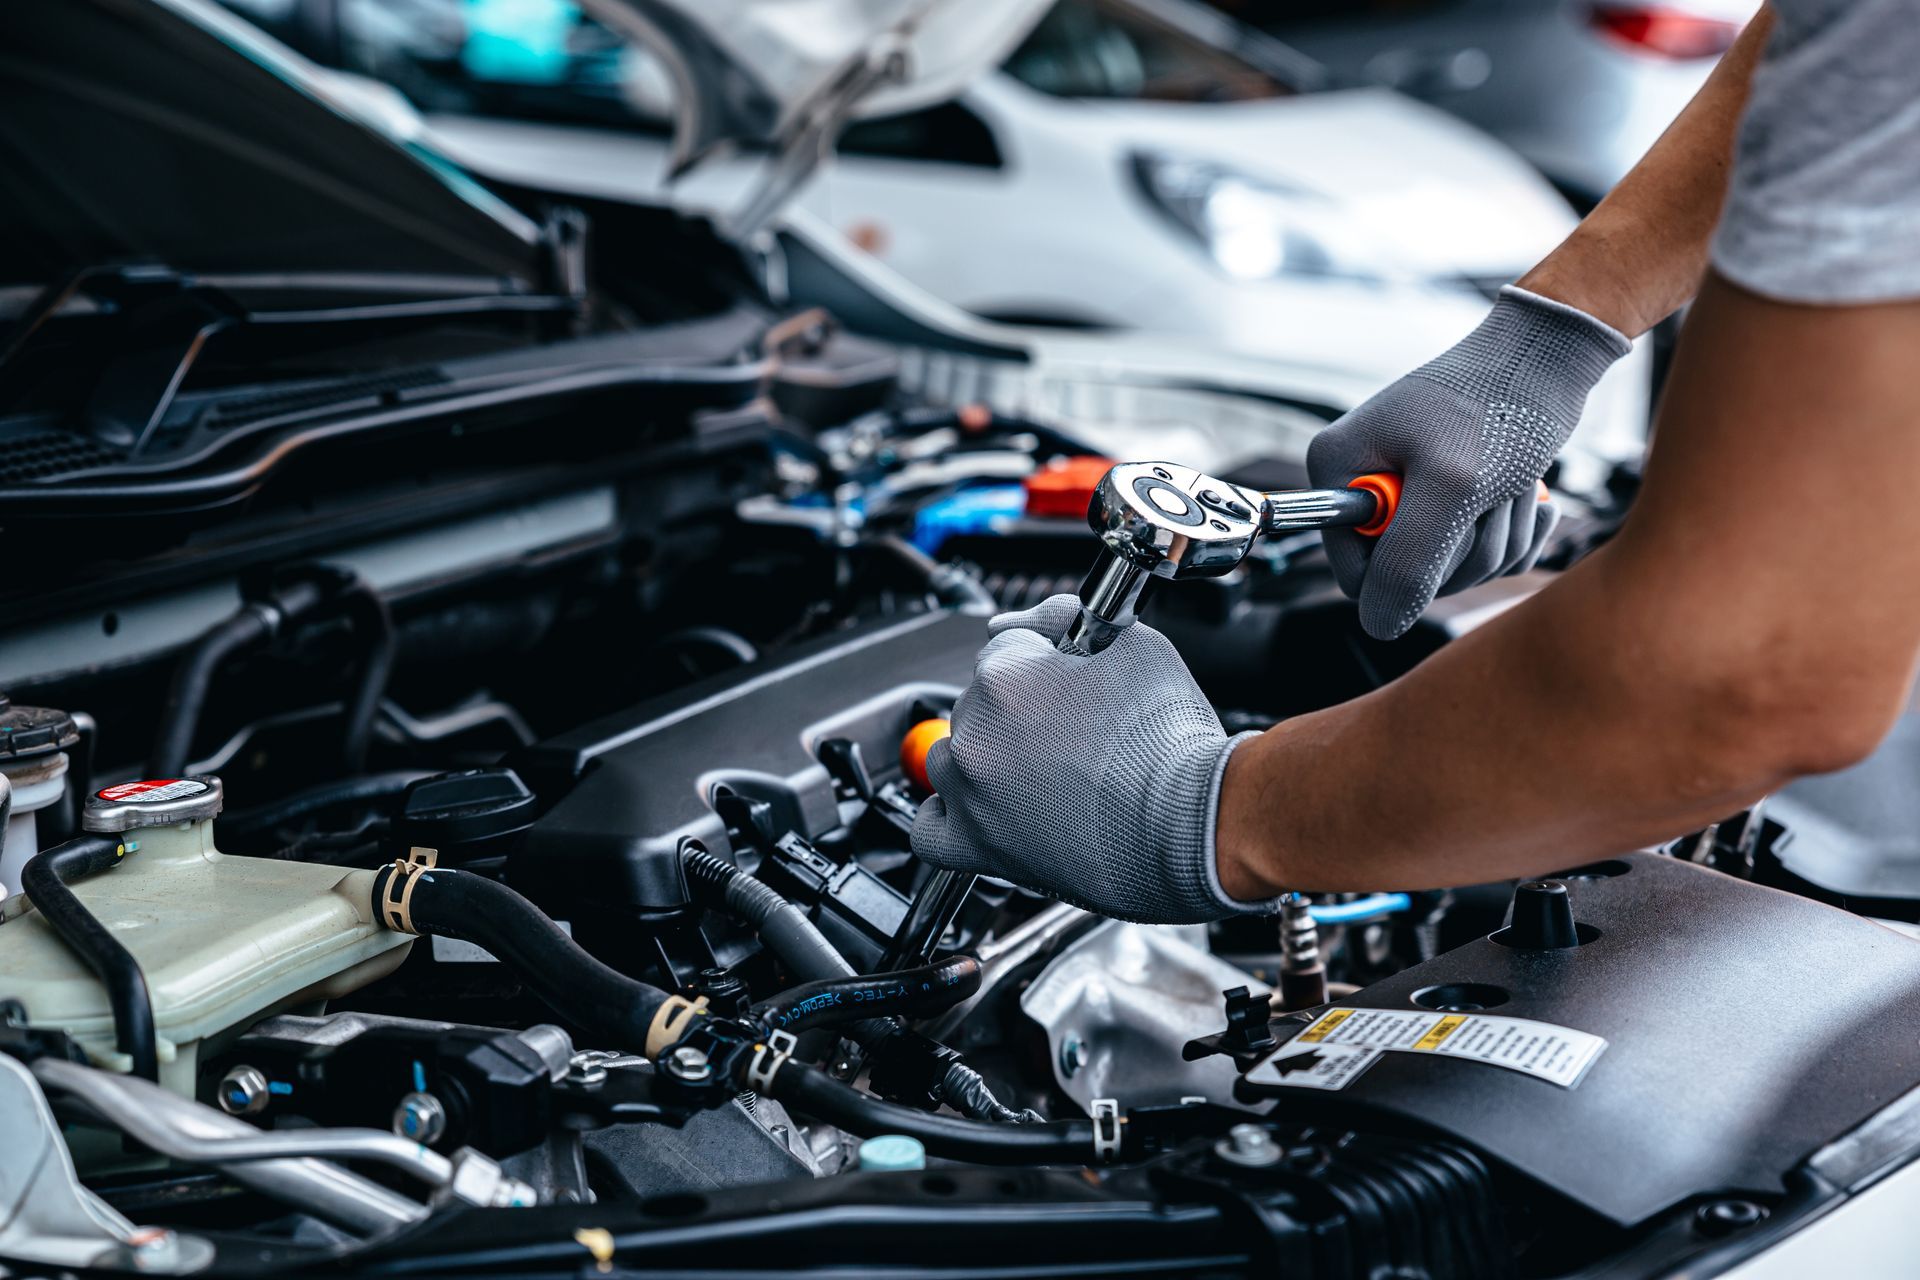 Learn about some of the best maintenance practices with General Automotive Servicenter, and keep you